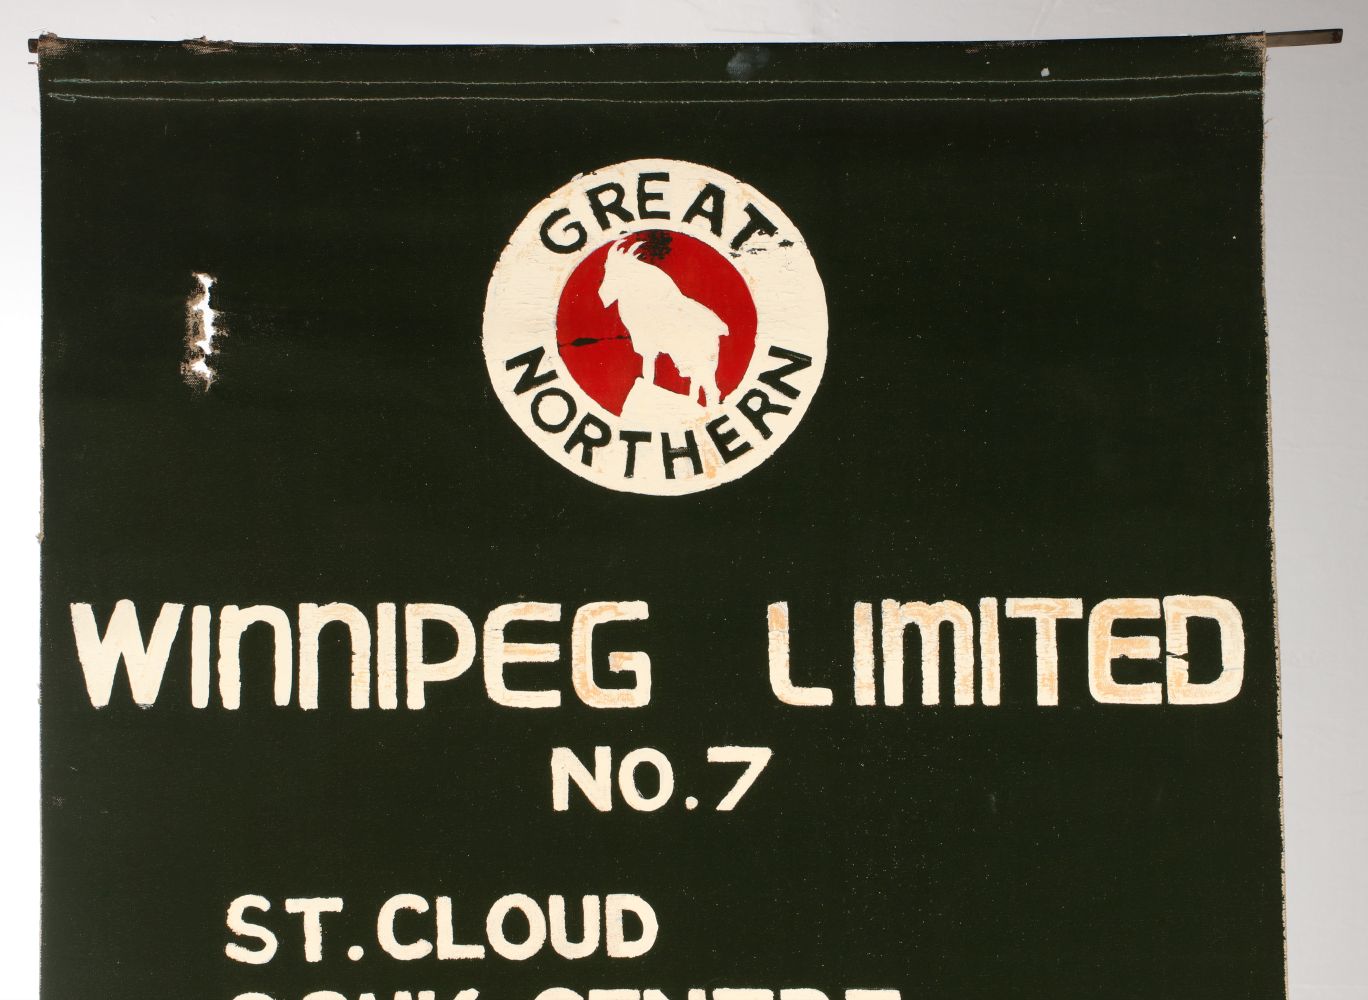 A PAINTED GATE SIGN FOR GREAT NORTHERN WINNIPEG LIMITED